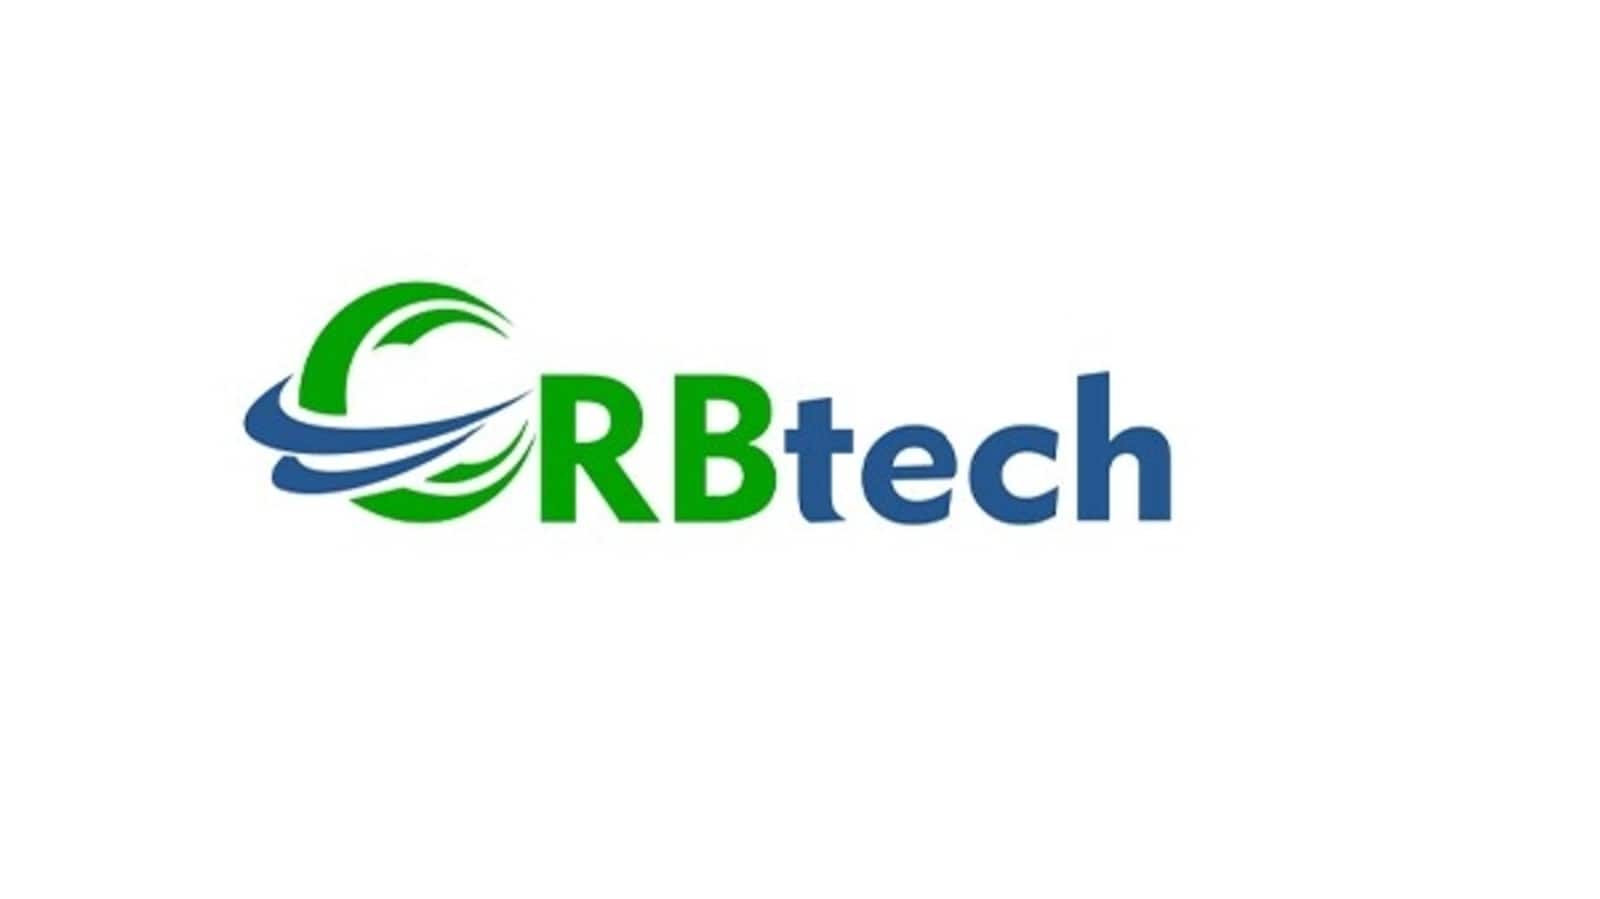 CRB Tech Reviews: 500+ Students Attend CRB's Japanese Webinar 2021